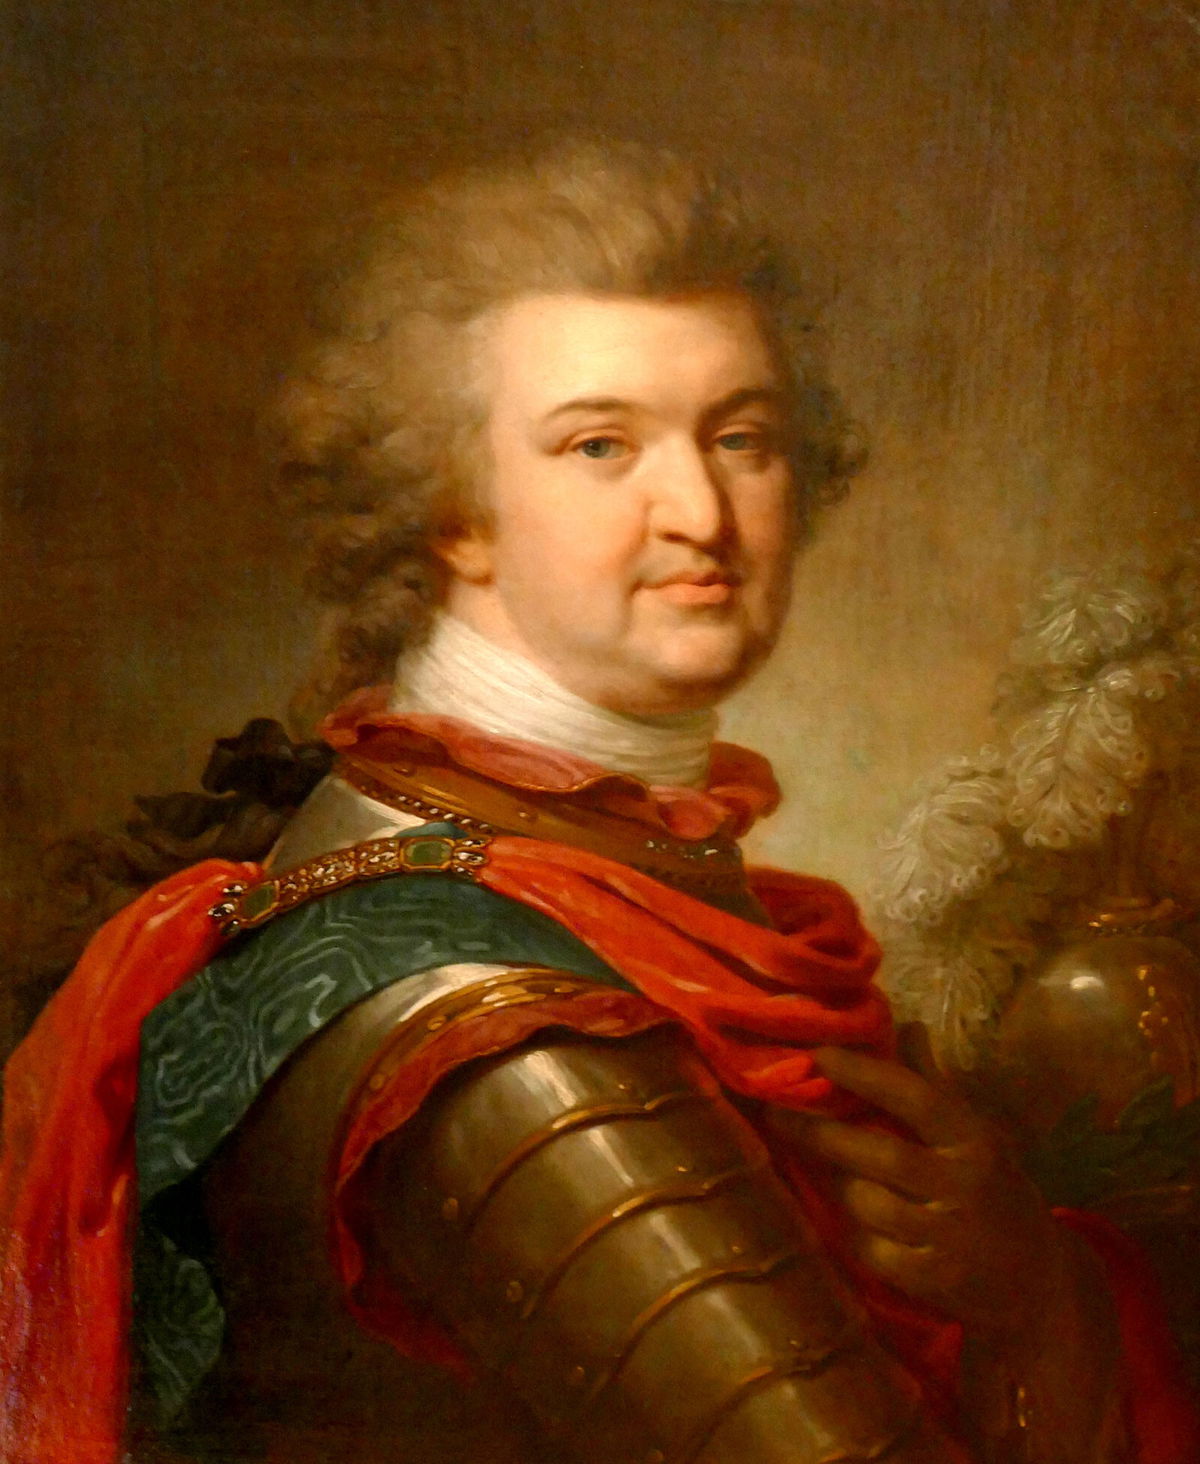 <i>Universal History Archive//Getty Images</i><br/>Pro-Russian officials say they have removed the bones of famed 18th century Russian commander Grigory Potemkin from the occupied Ukrainian city of Kherson. A portrait of Potemkin from 1790 is seen here.